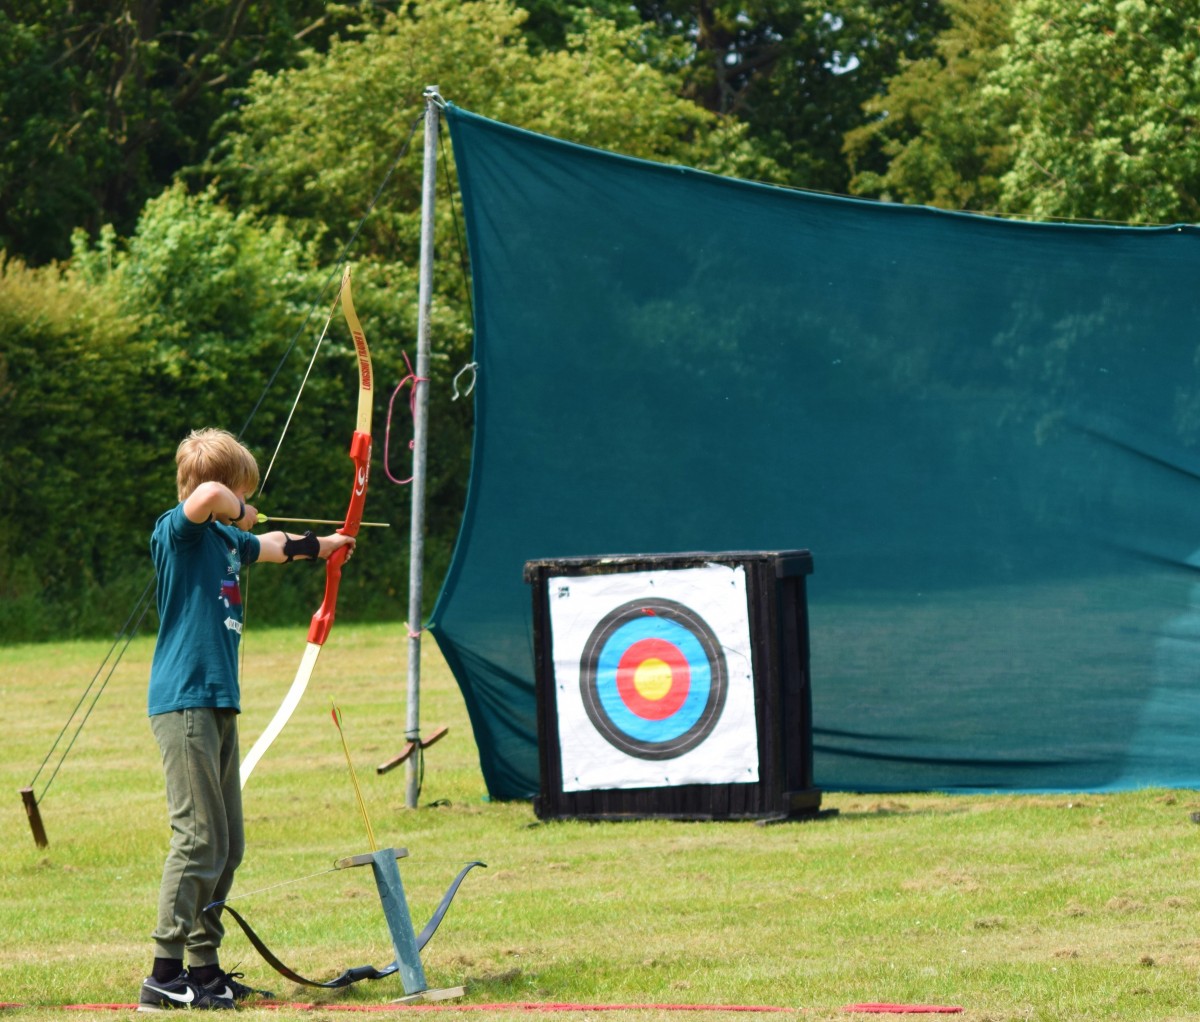 Child drawing bow and preparing to fire arrow at Archery field